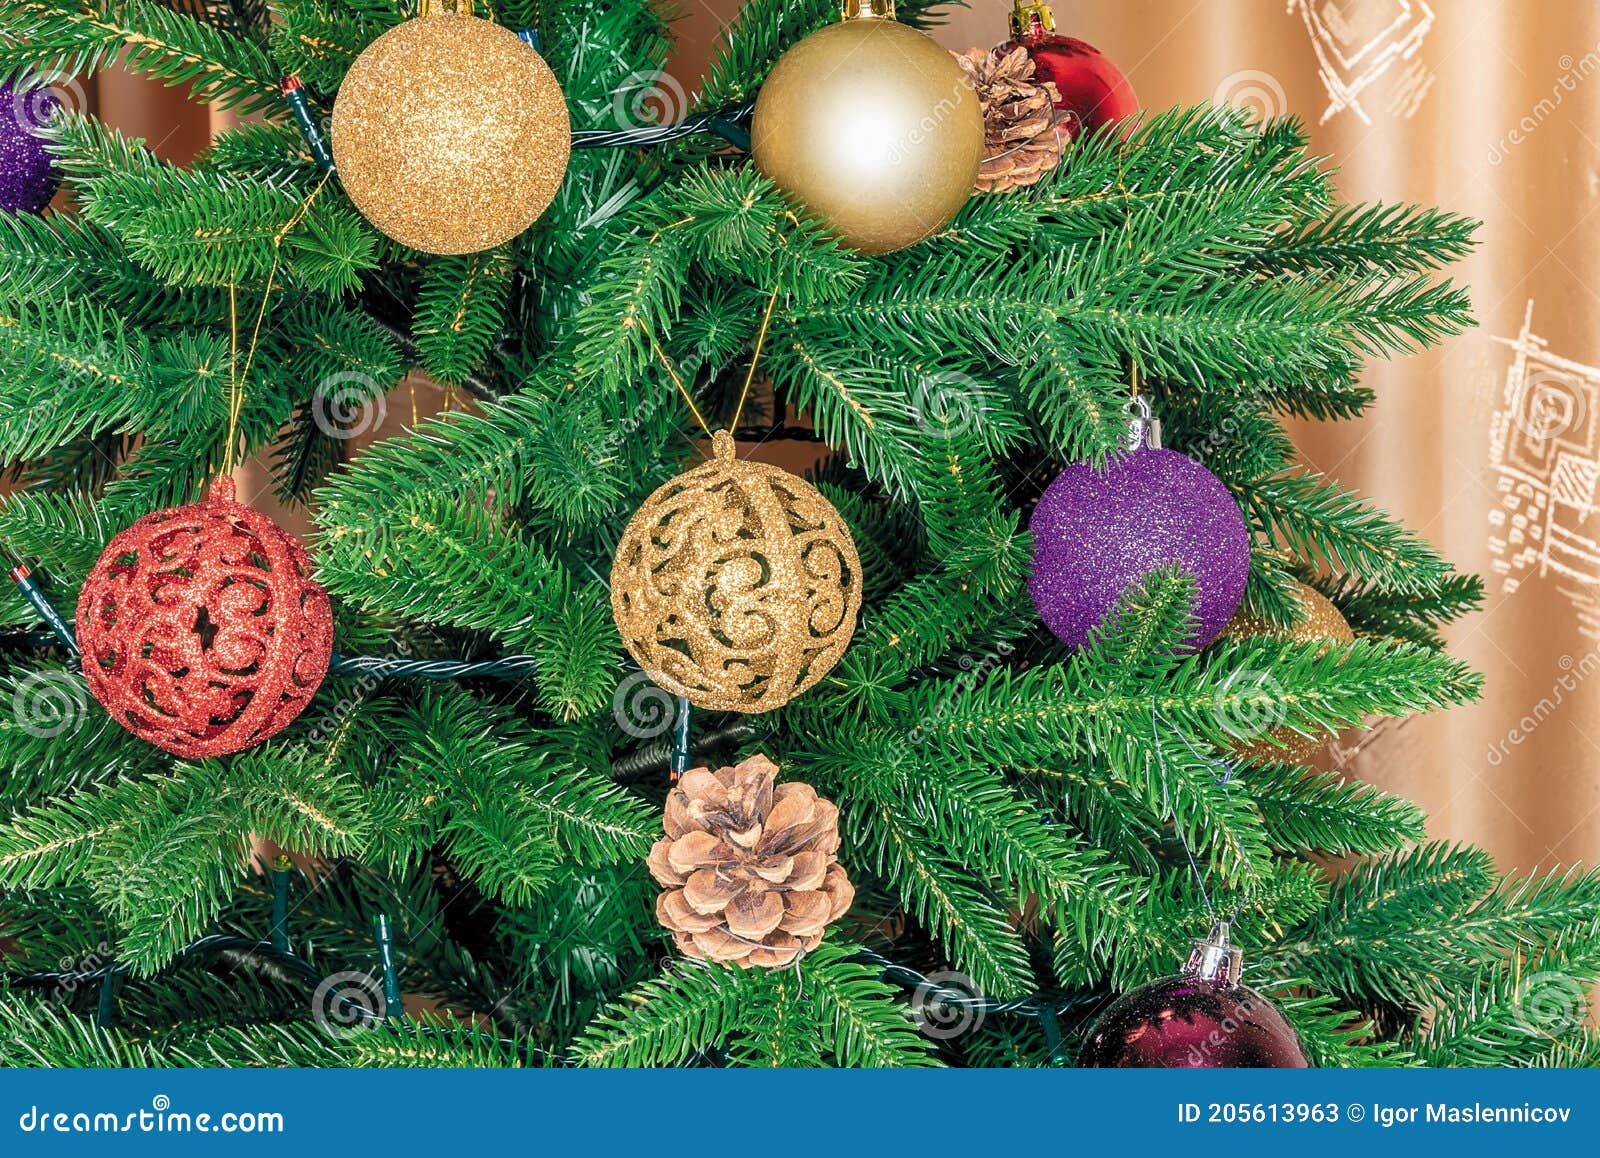 Christmas Tree Branch Decorated with Christmas Decorations Stock Image ...